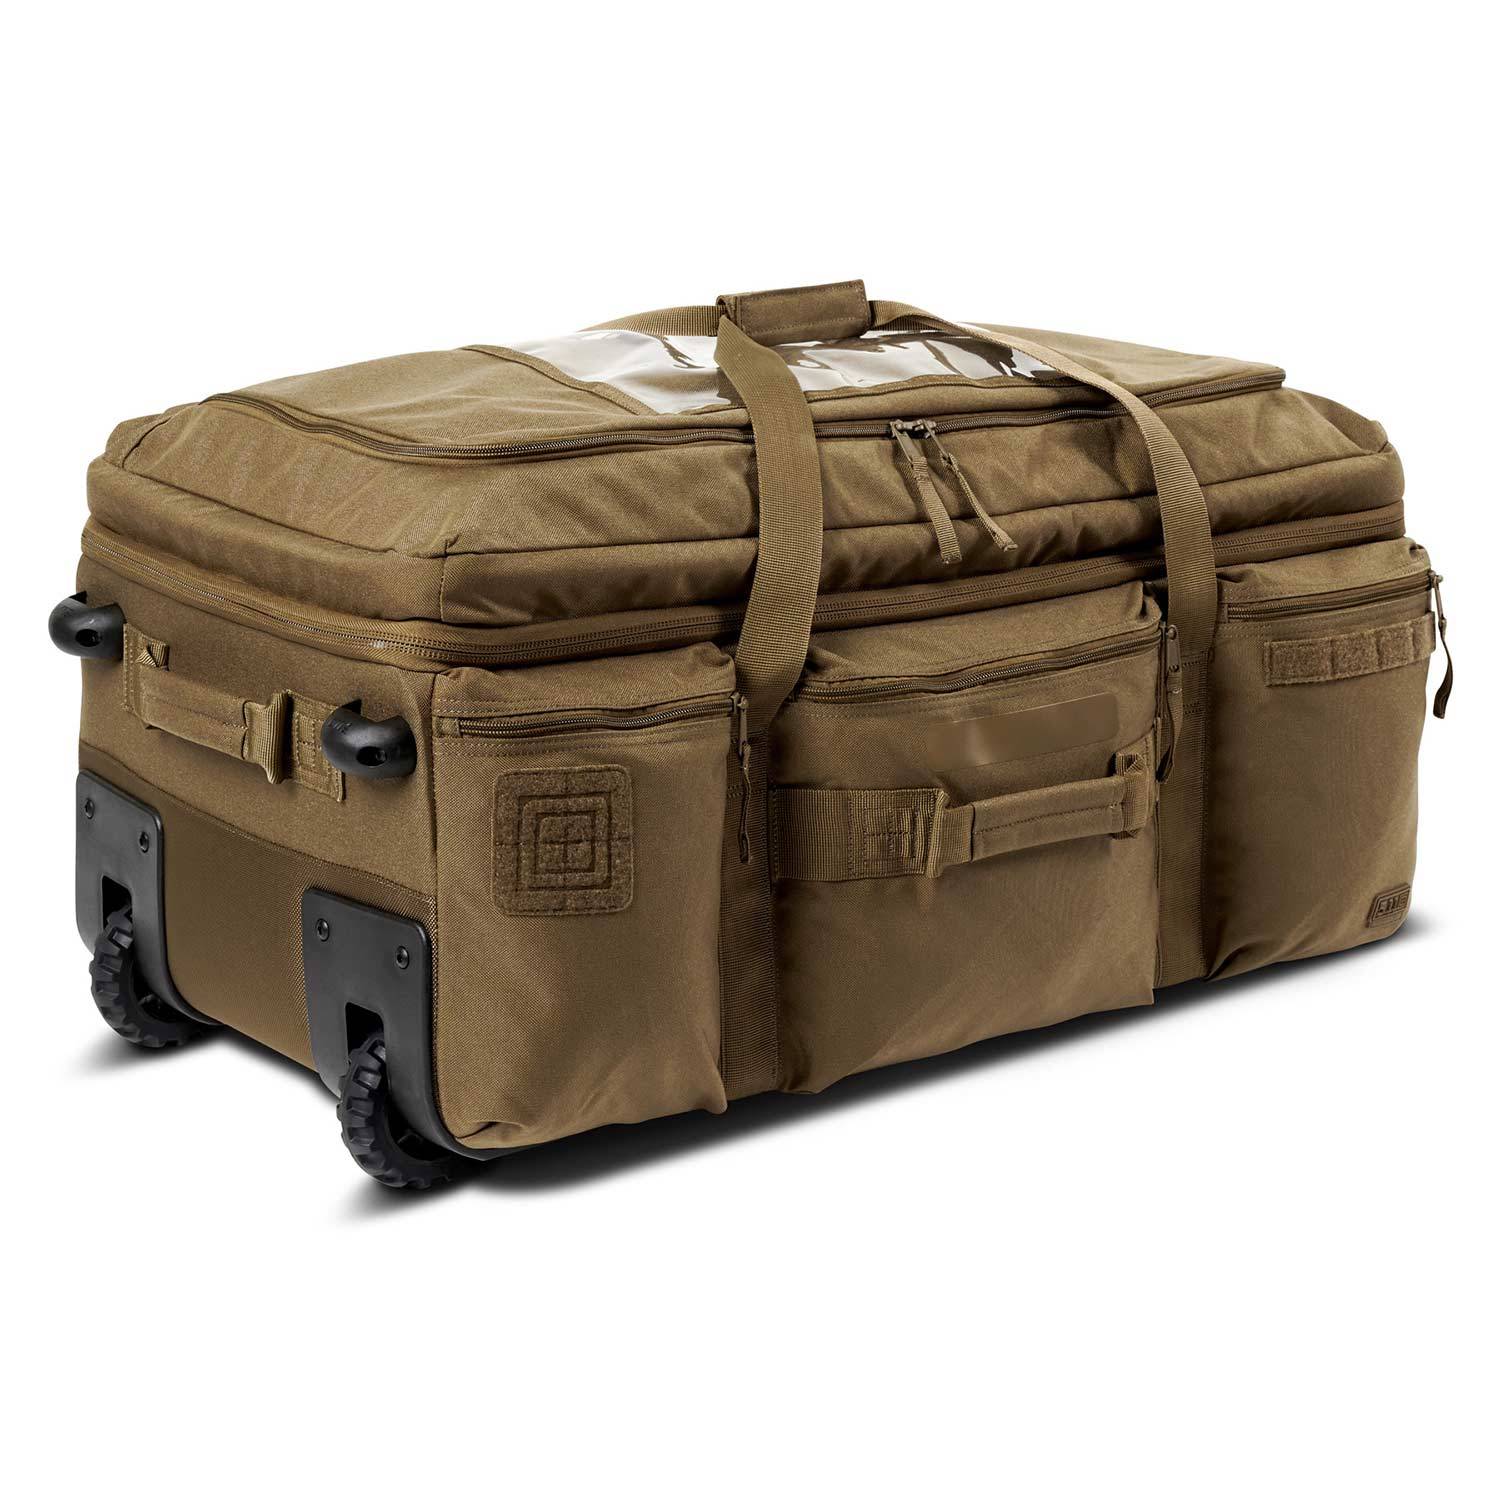 5.11 TACTICAL MISSION READY 3.0 90L WHEELED DUFFLE BAG